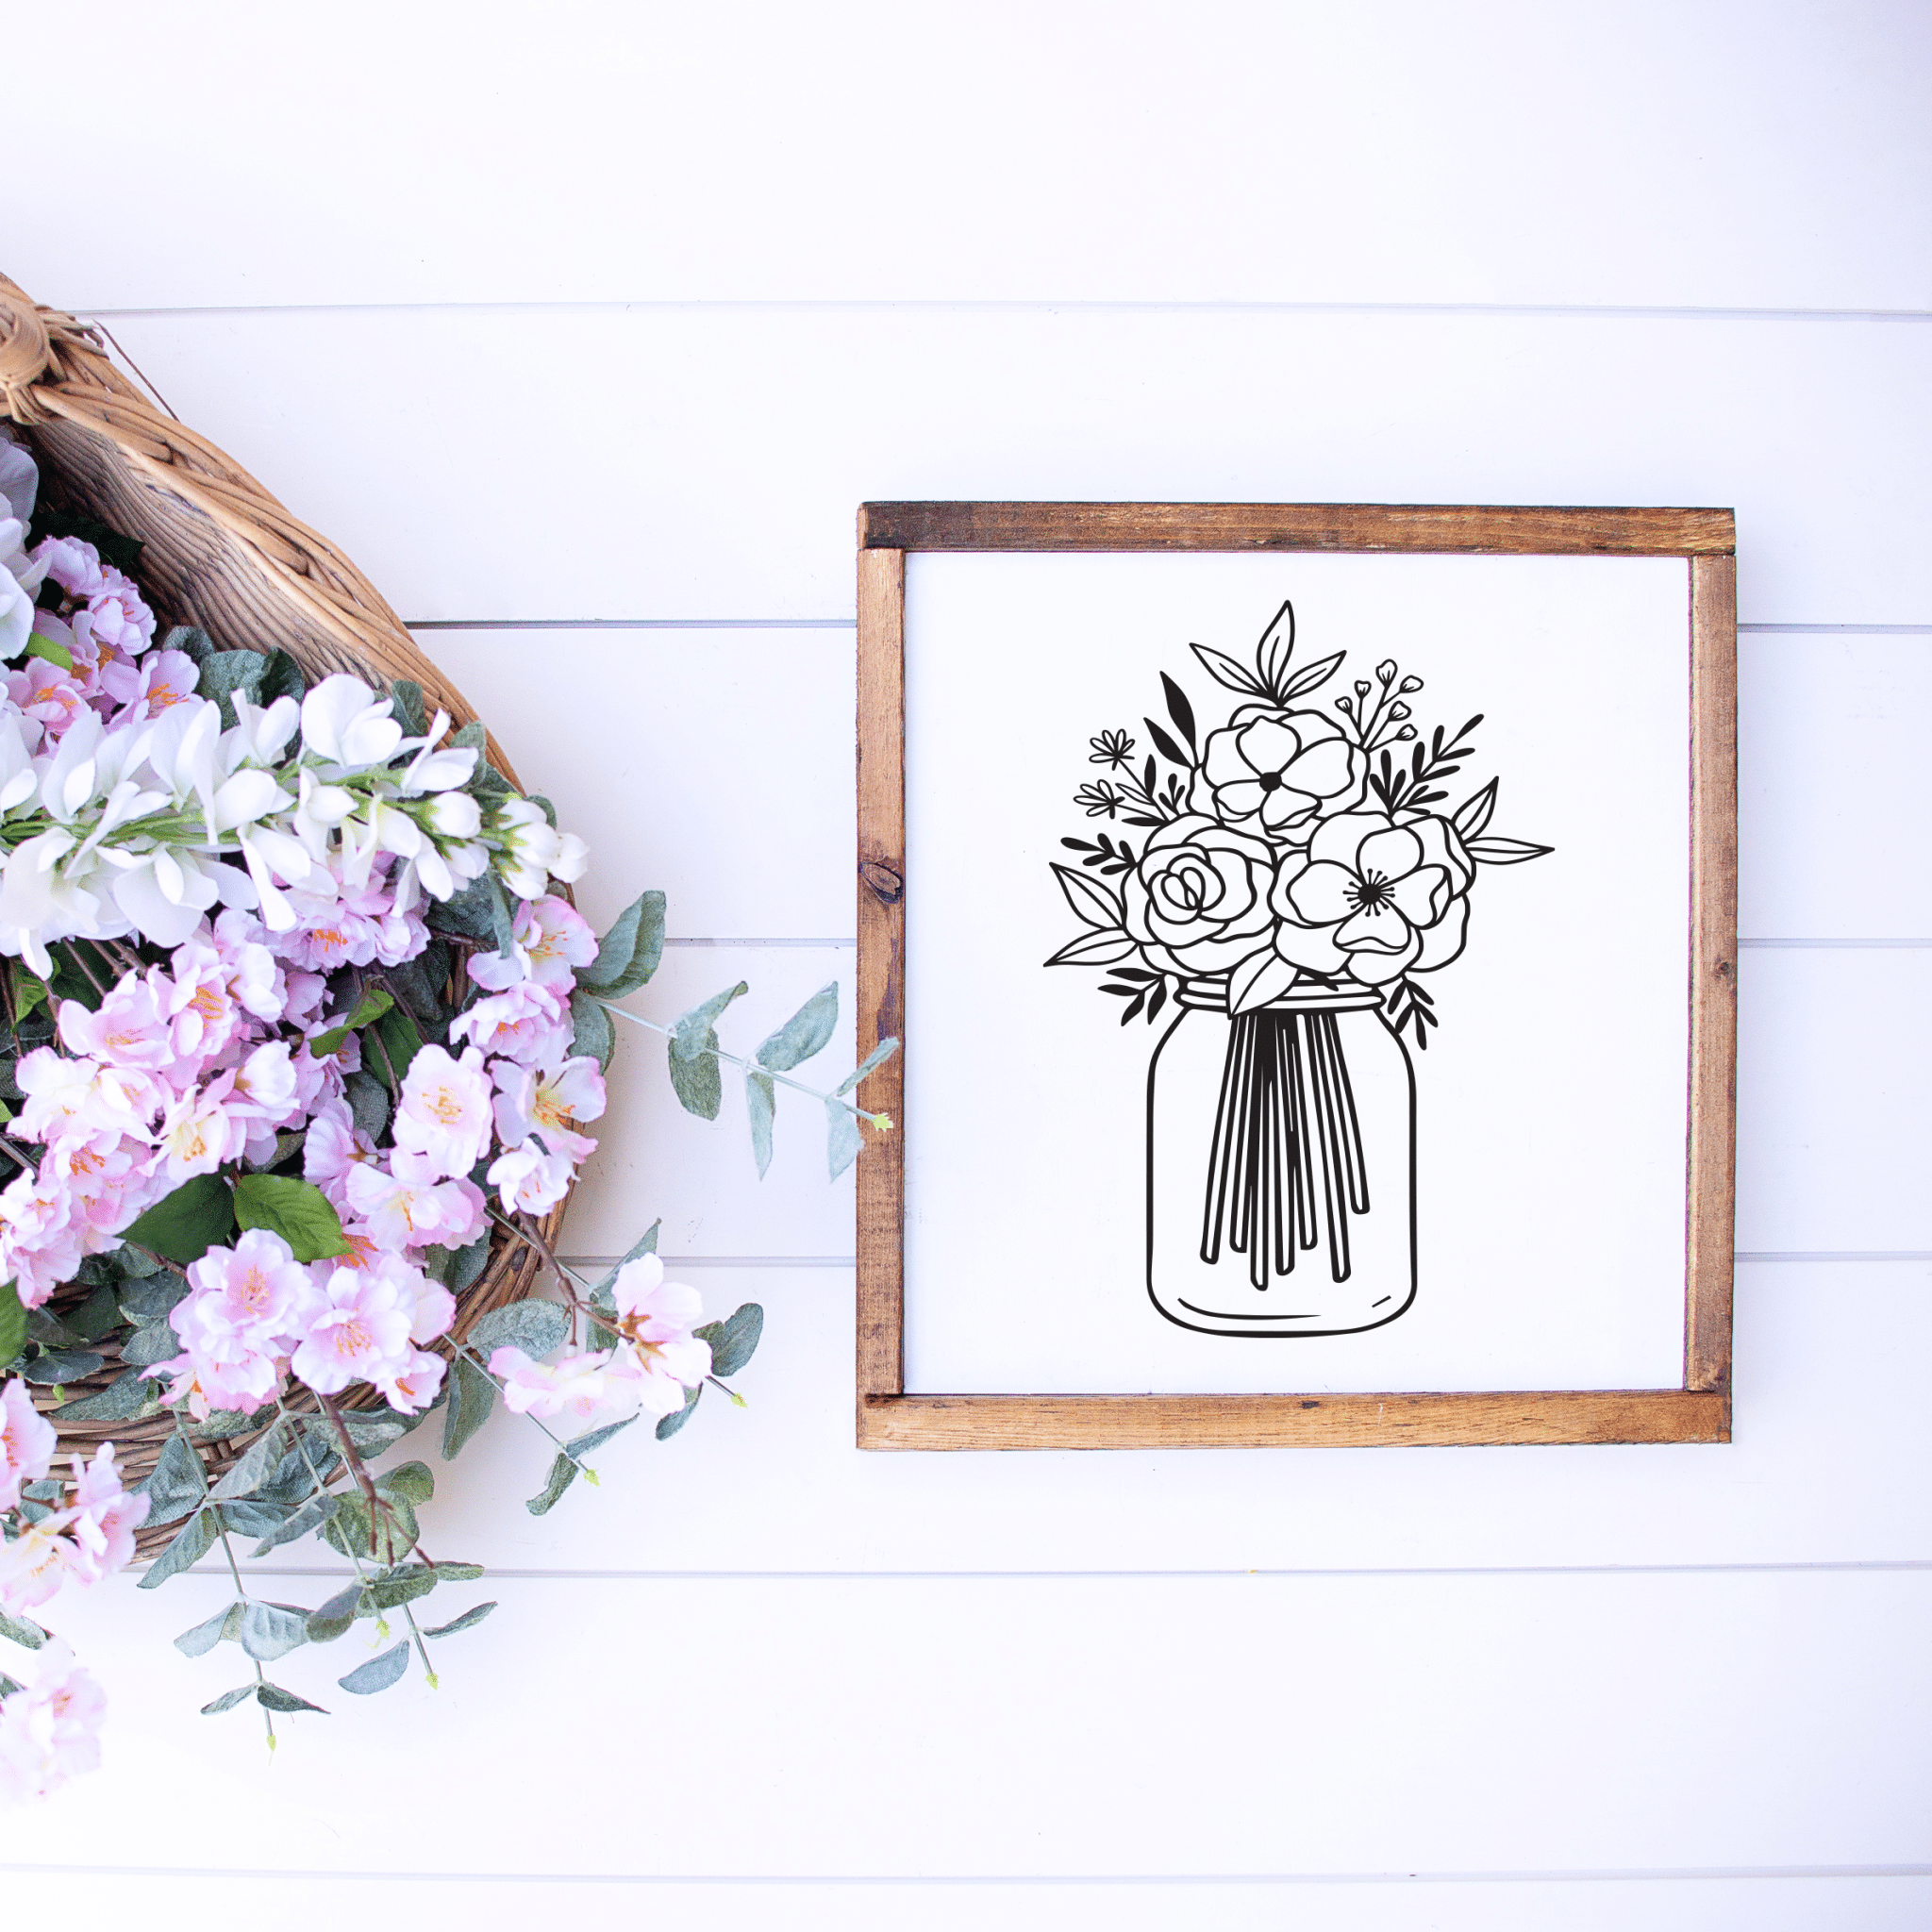 wood farmhouse sign with an image of wild flowers in a mason jar